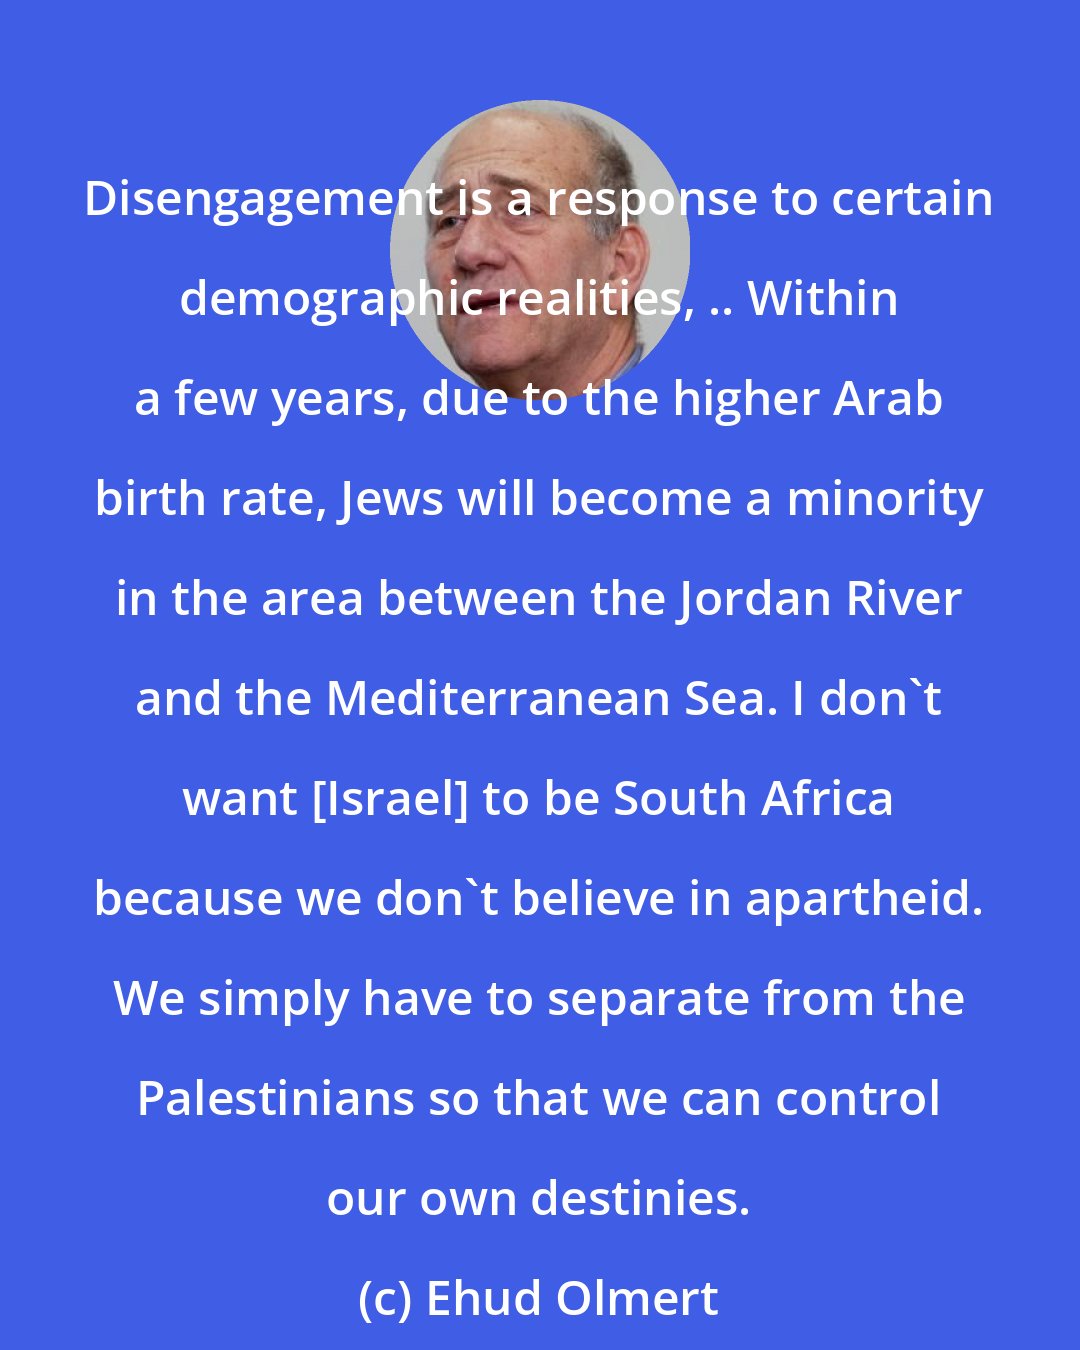 Ehud Olmert: Disengagement is a response to certain demographic realities, .. Within a few years, due to the higher Arab birth rate, Jews will become a minority in the area between the Jordan River and the Mediterranean Sea. I don't want [Israel] to be South Africa because we don't believe in apartheid. We simply have to separate from the Palestinians so that we can control our own destinies.